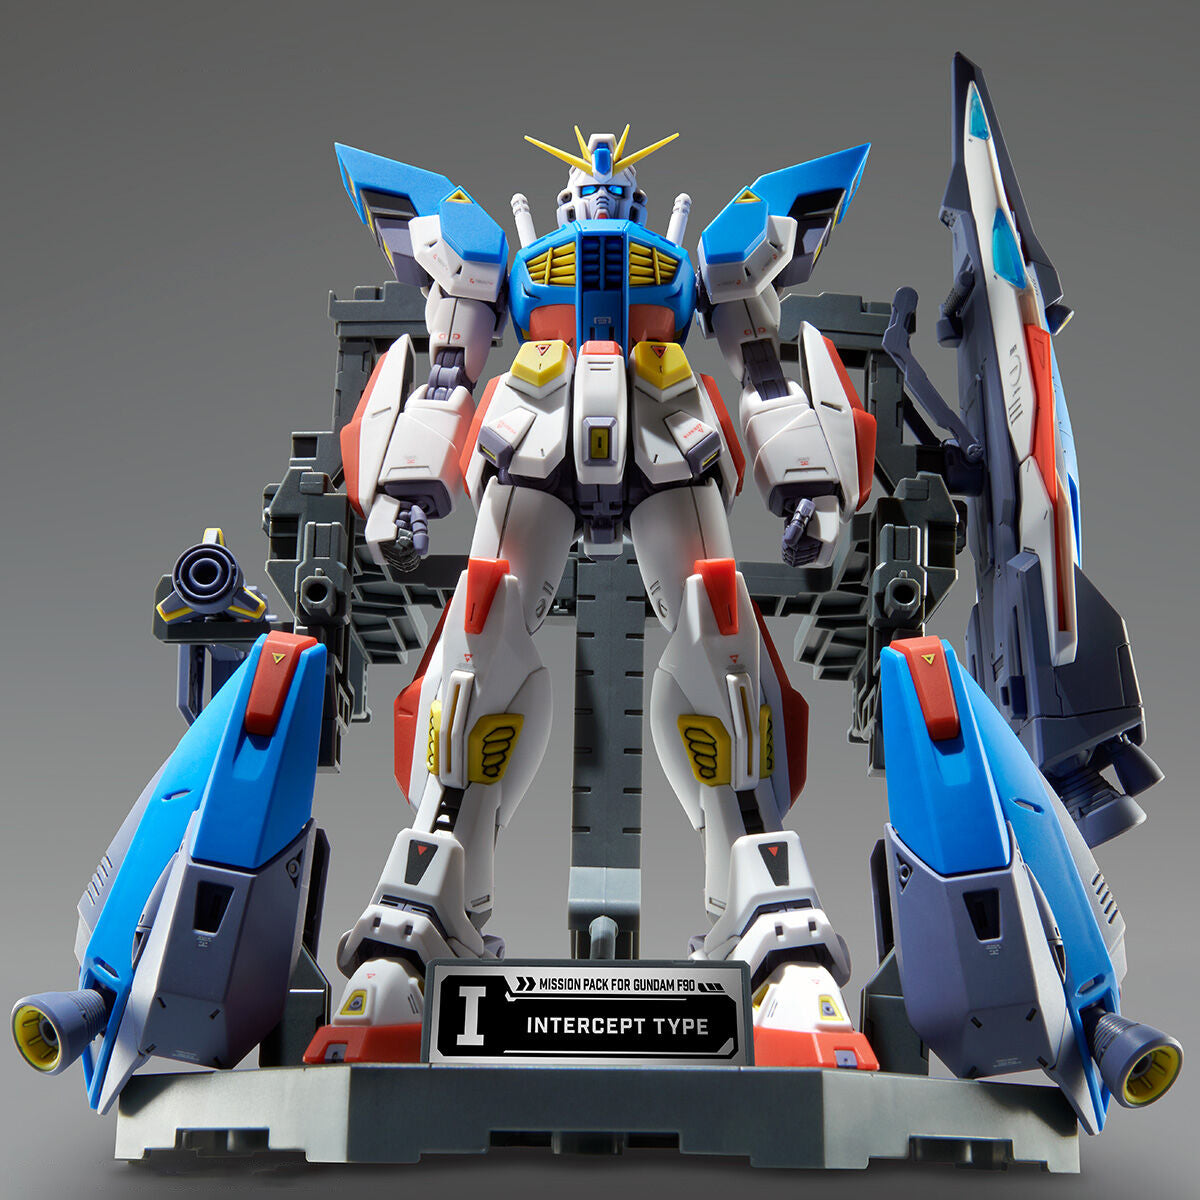 [IN STOCK in HK] MG 1/100 Mission Pack Hangar For Gundam F90 Twin Set